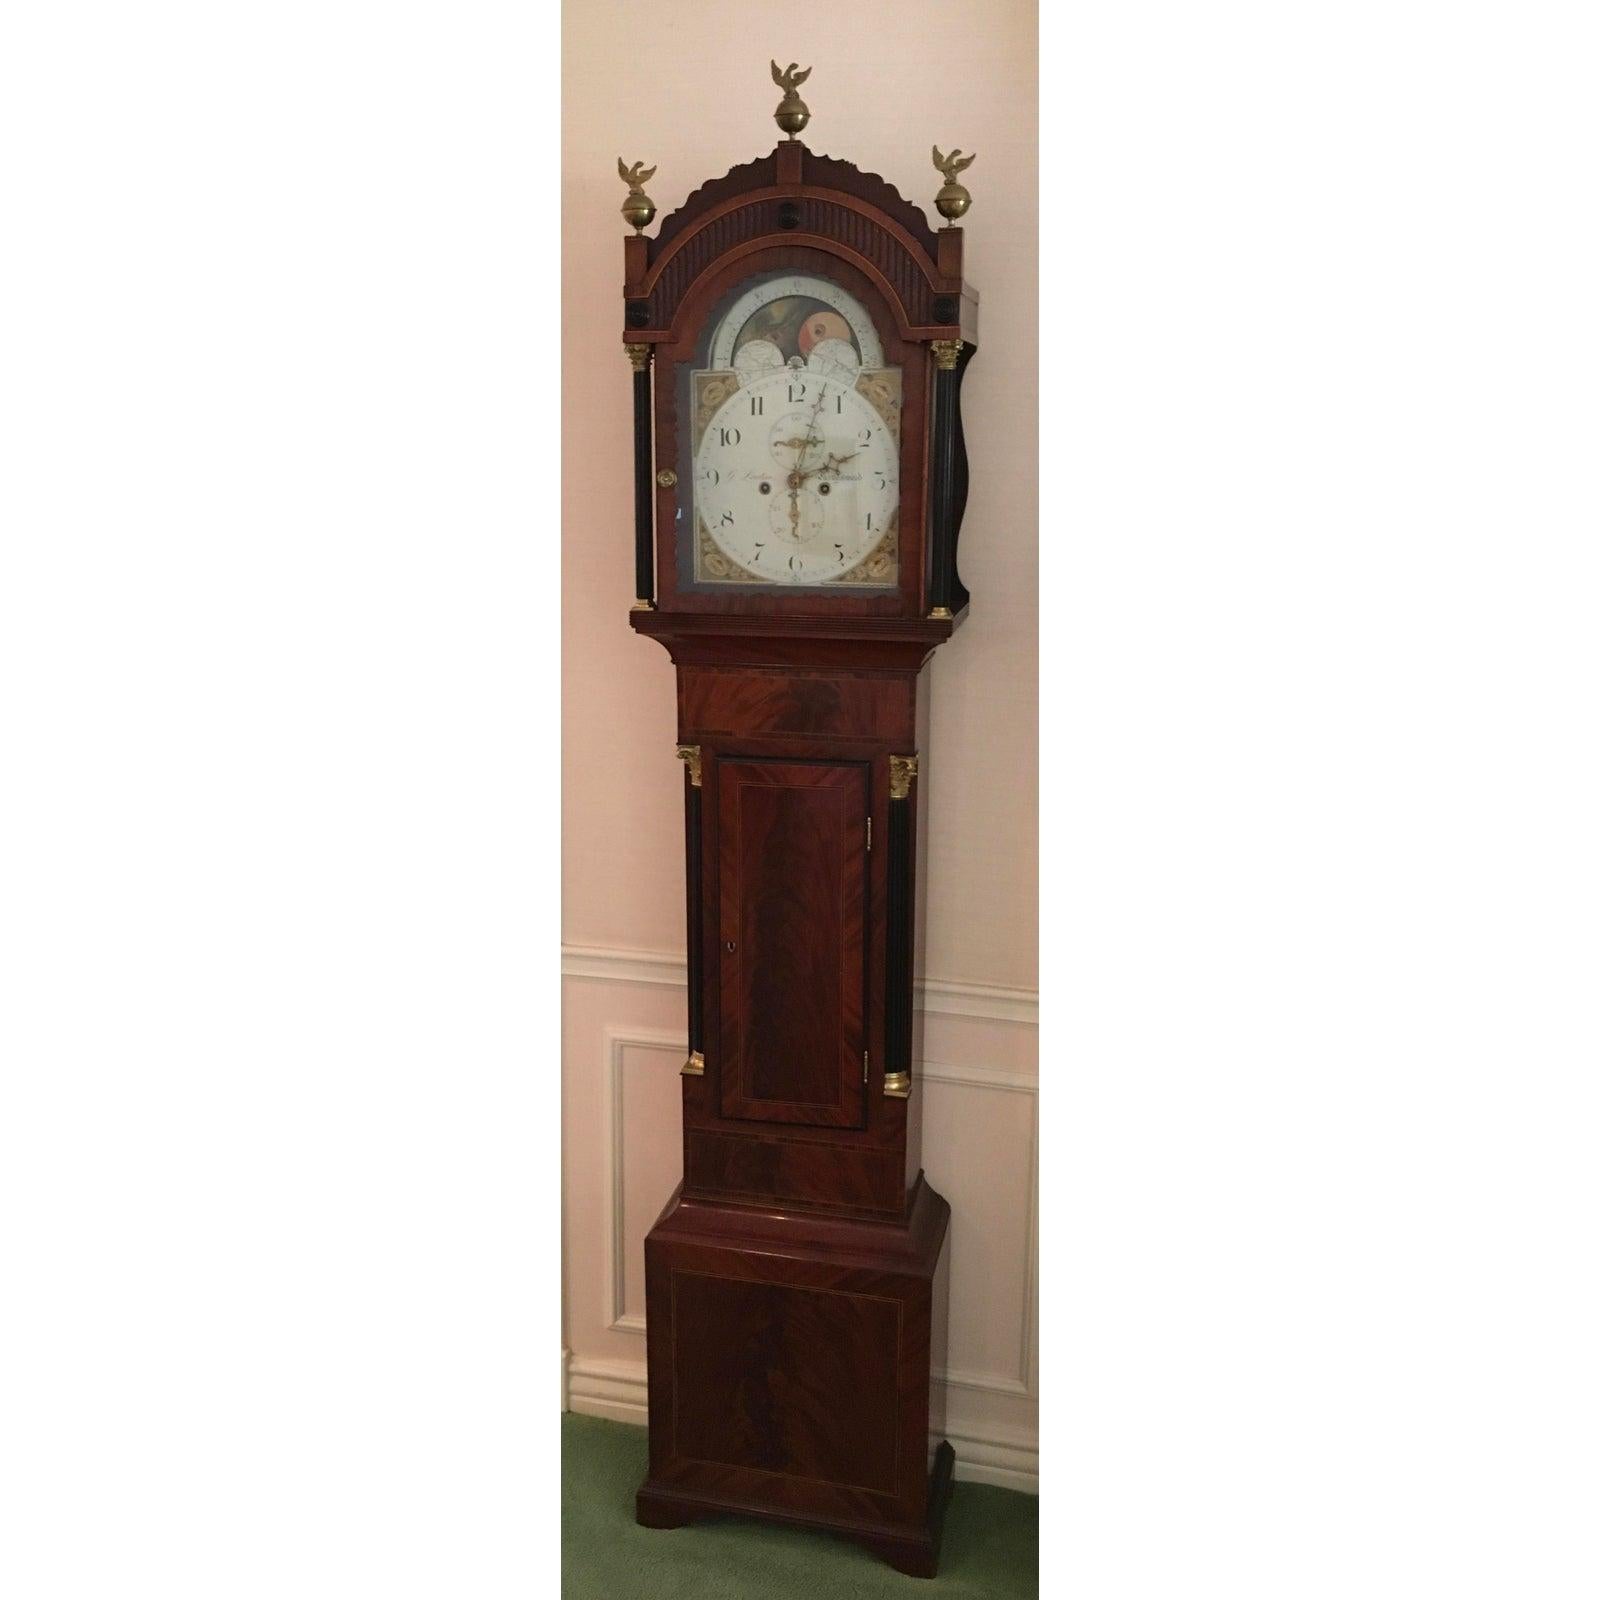 Antique English George Lawton of Kingswood English Mahogany long case clock.

Additional information:
Materials: Mahogany.
Color: Brown.
Period: Early 19th century.
Styles: English.
Item Type: Vintage, Antique or Pre-owned.
Dimensions: 18